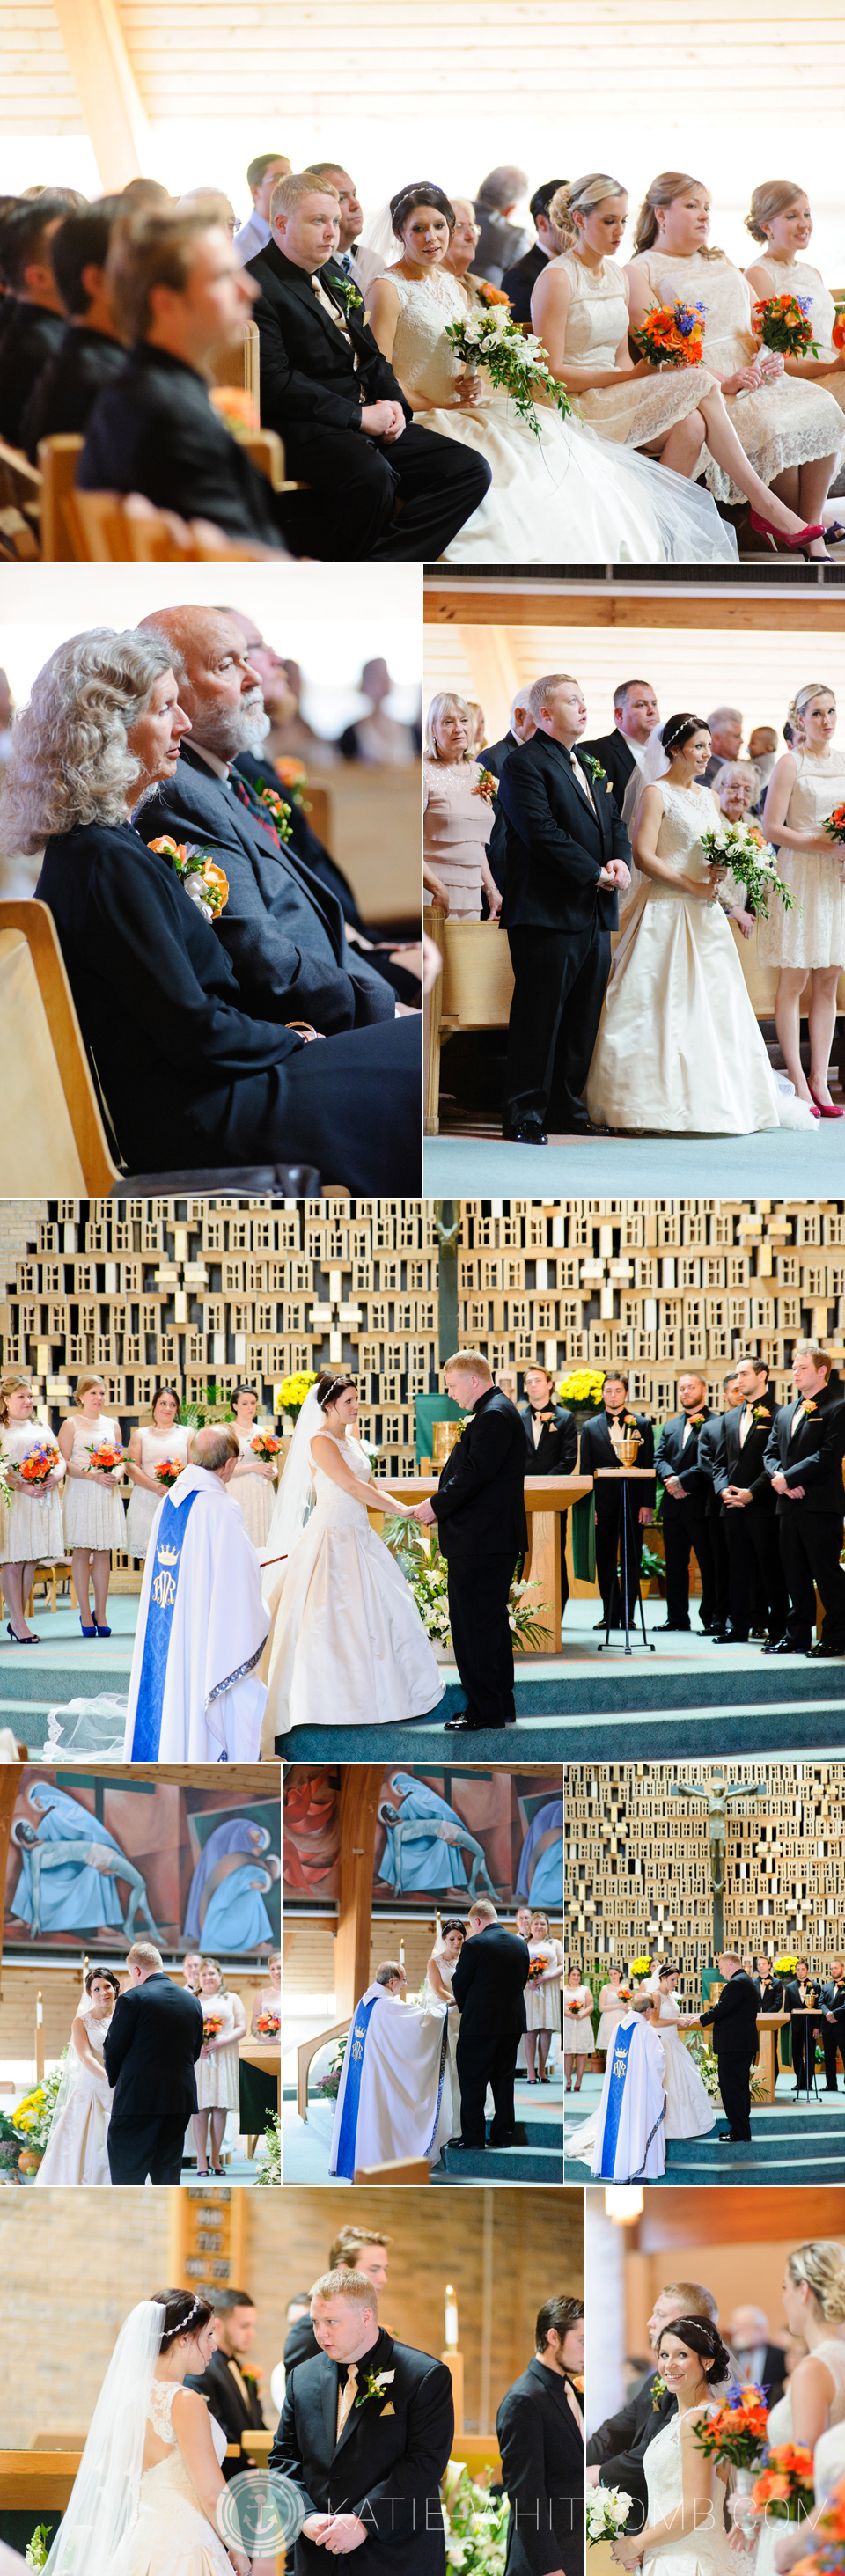 wedding ceremony at Little Flower Catholic Church in South Bend